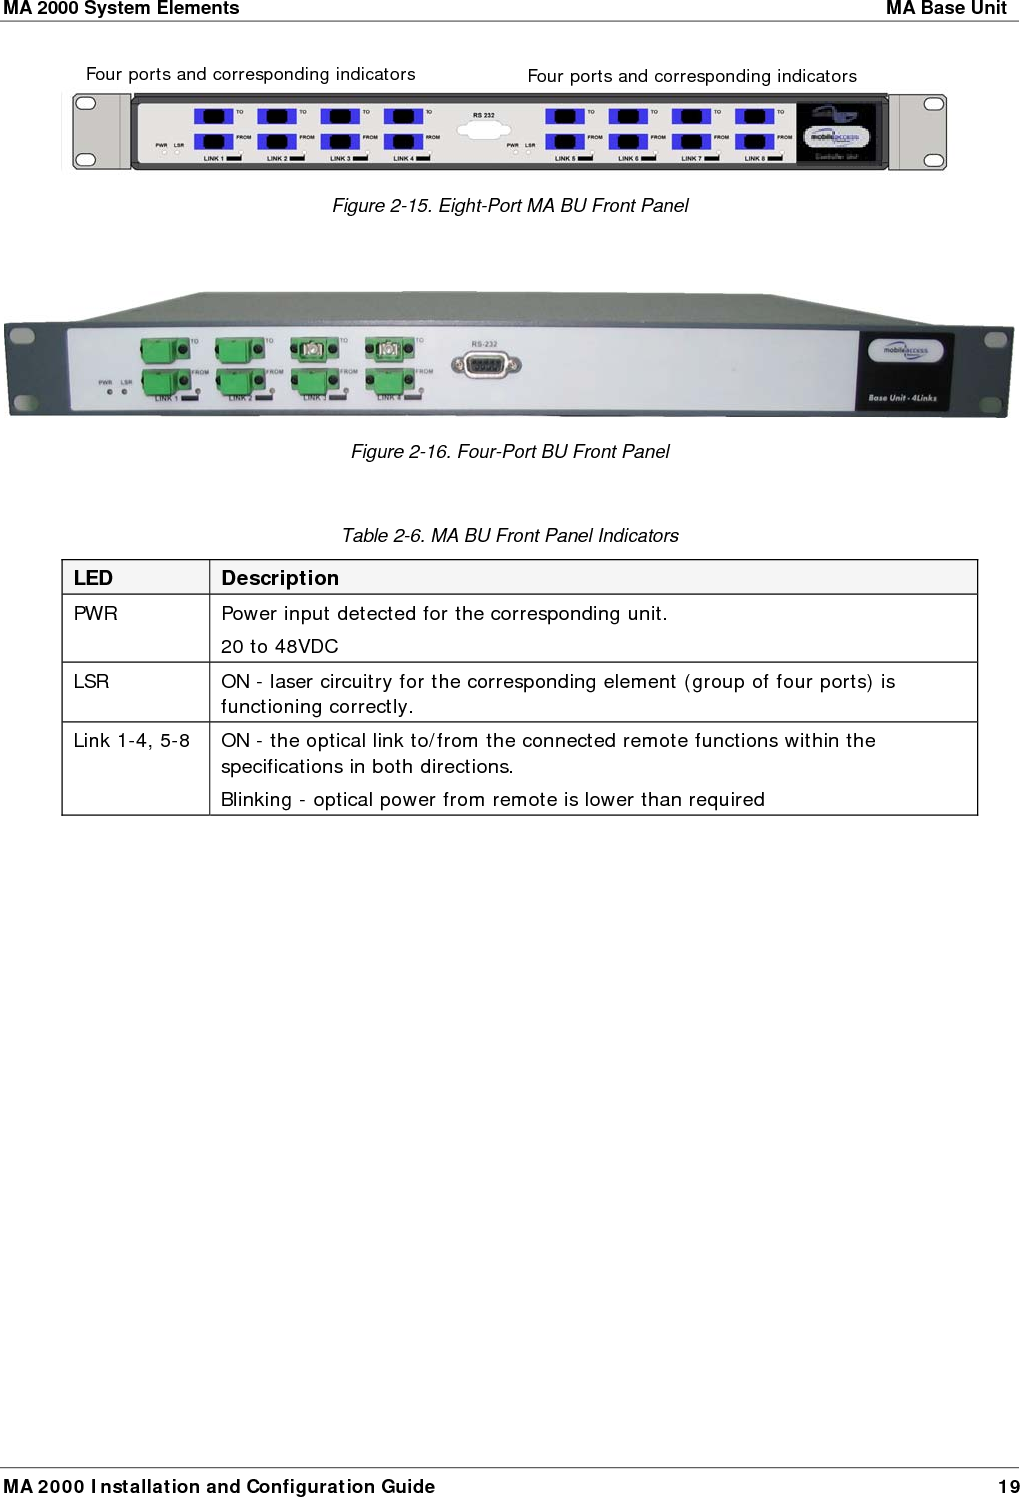 MA 2000 System Elements    MA Base Unit  MA 2000 Installation and Configuration Guide  19   Figure  2-15. Eight-Port MA BU Front Panel   Figure  2-16. Four-Port BU Front Panel  Table  2-6. MA BU Front Panel Indicators LED  Description PWR  Power input detected for the corresponding unit.  20 to 48VDC LSR  ON - laser circuitry for the corresponding element (group of four ports) is functioning correctly. Link 1-4, 5-8  ON - the optical link to/from the connected remote functions within the specifications in both directions.  Blinking - optical power from remote is lower than required  Four ports and corresponding indicators Four ports and corresponding indicators 